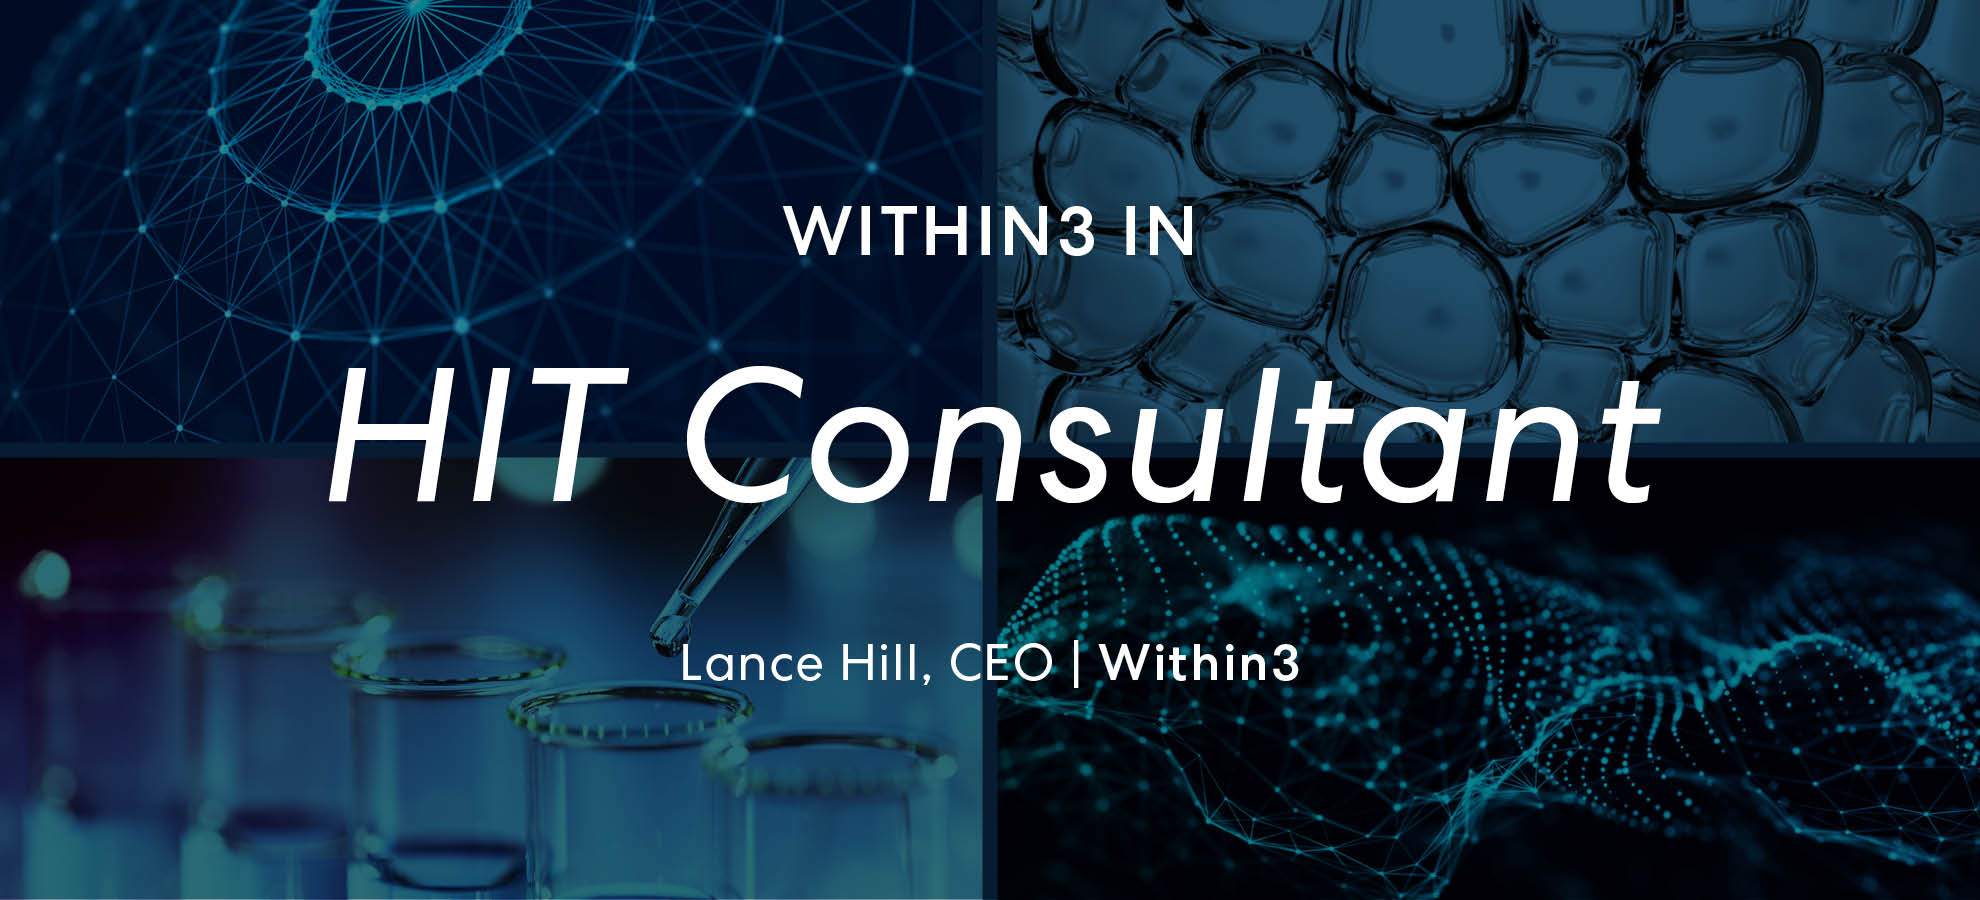 Within3 in HIT Consultant